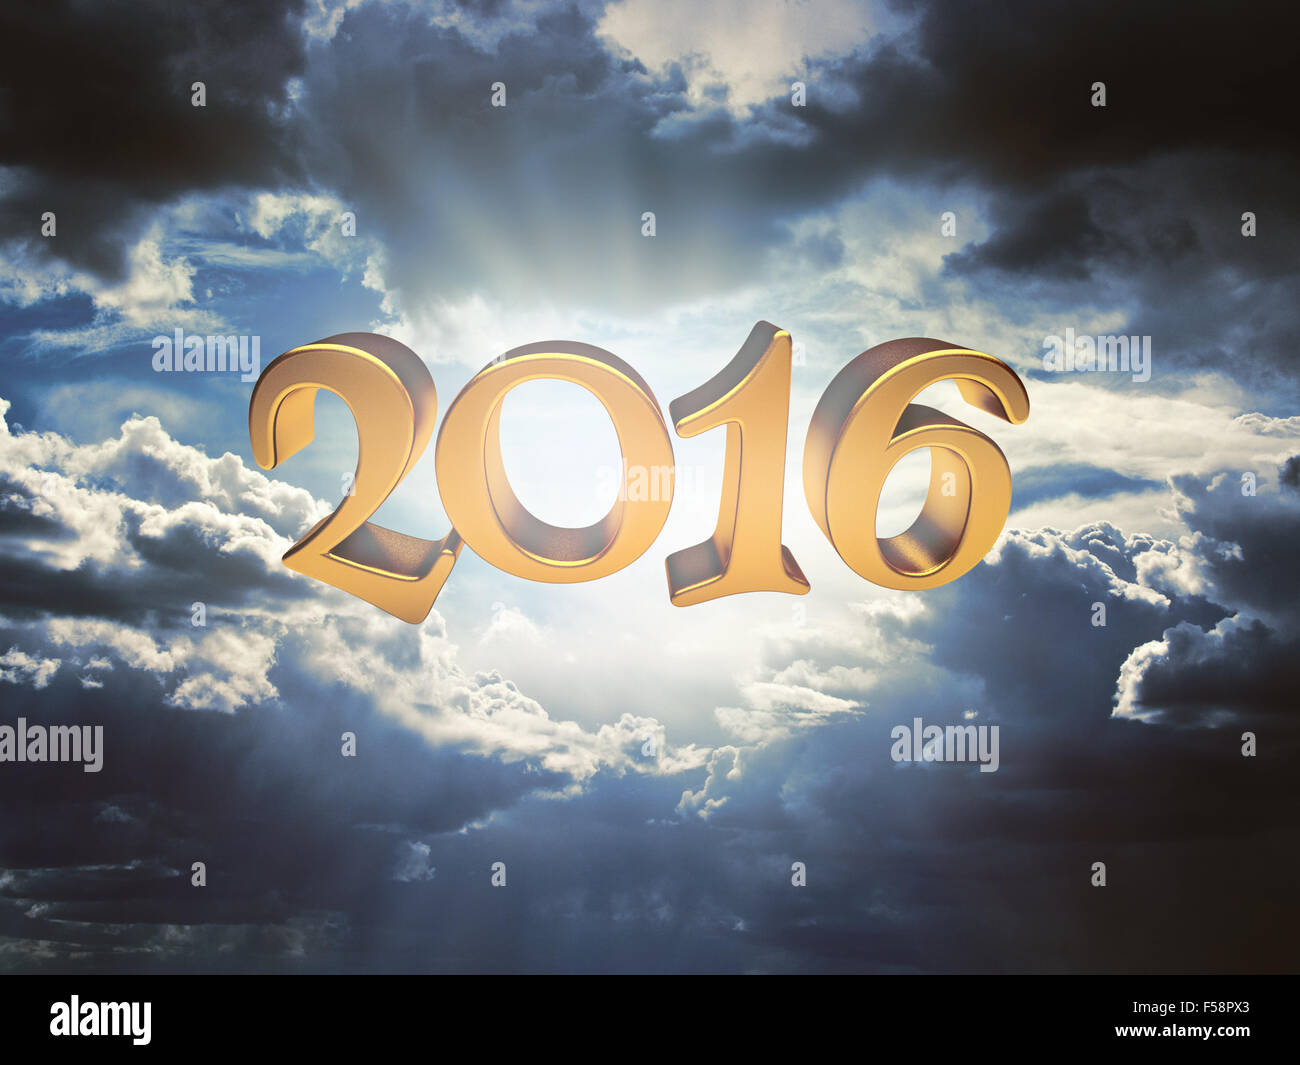 2016 on background of dark clouds before a thunderstorm Stock Photo